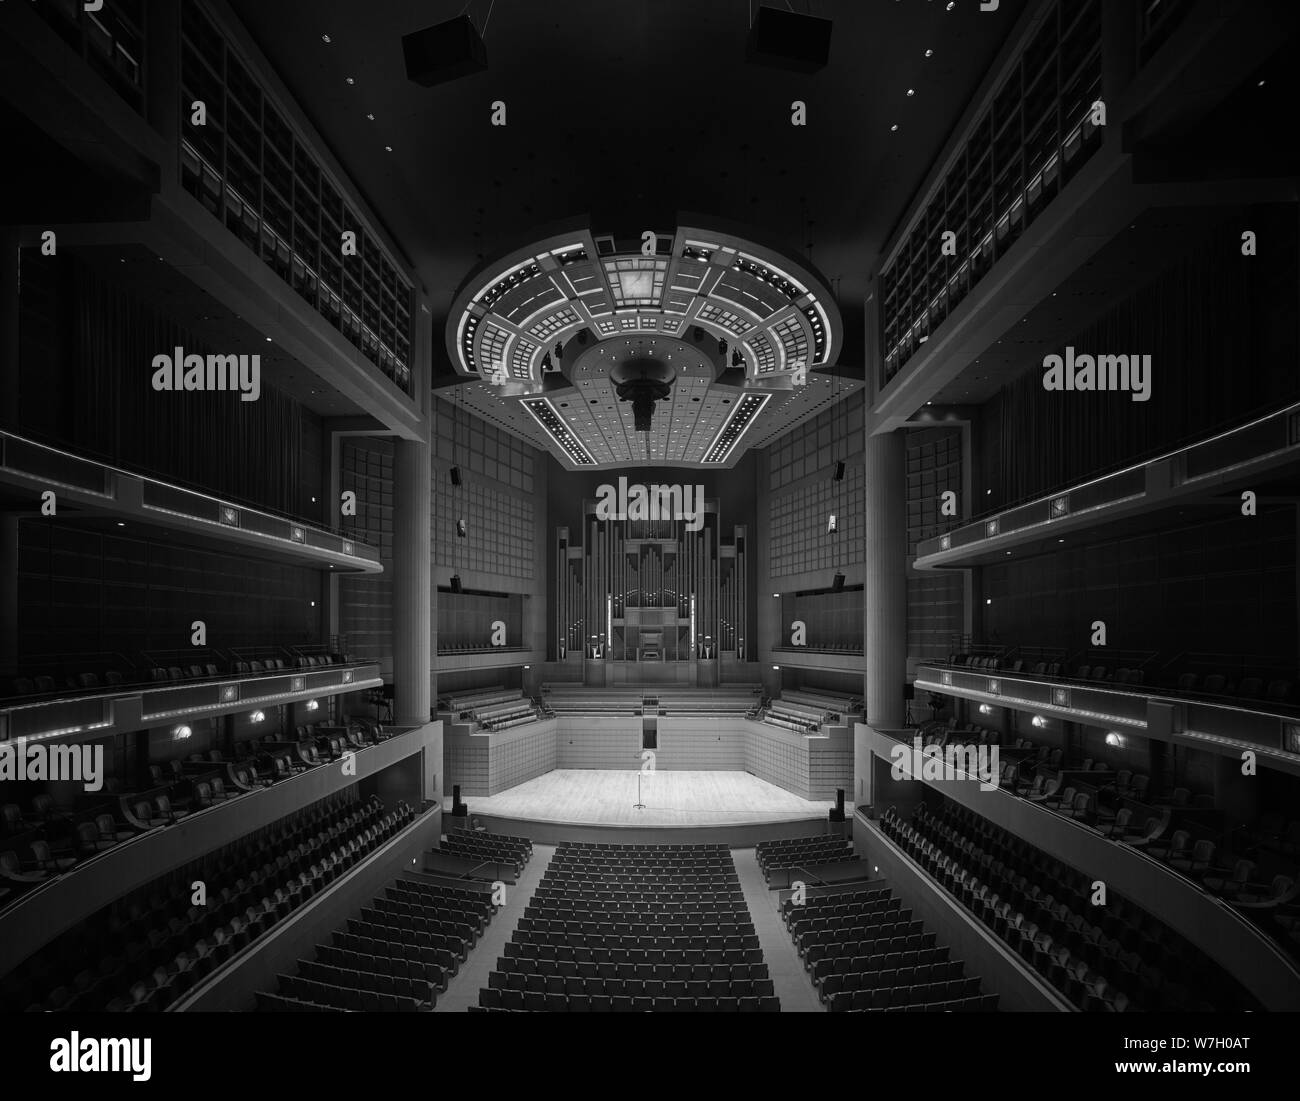 Black-and-white image of the auditorium at the Morton H. Myerson Symphony Center, which opened in 1989 in the Arts District of Dallas, Texas Stock Photo